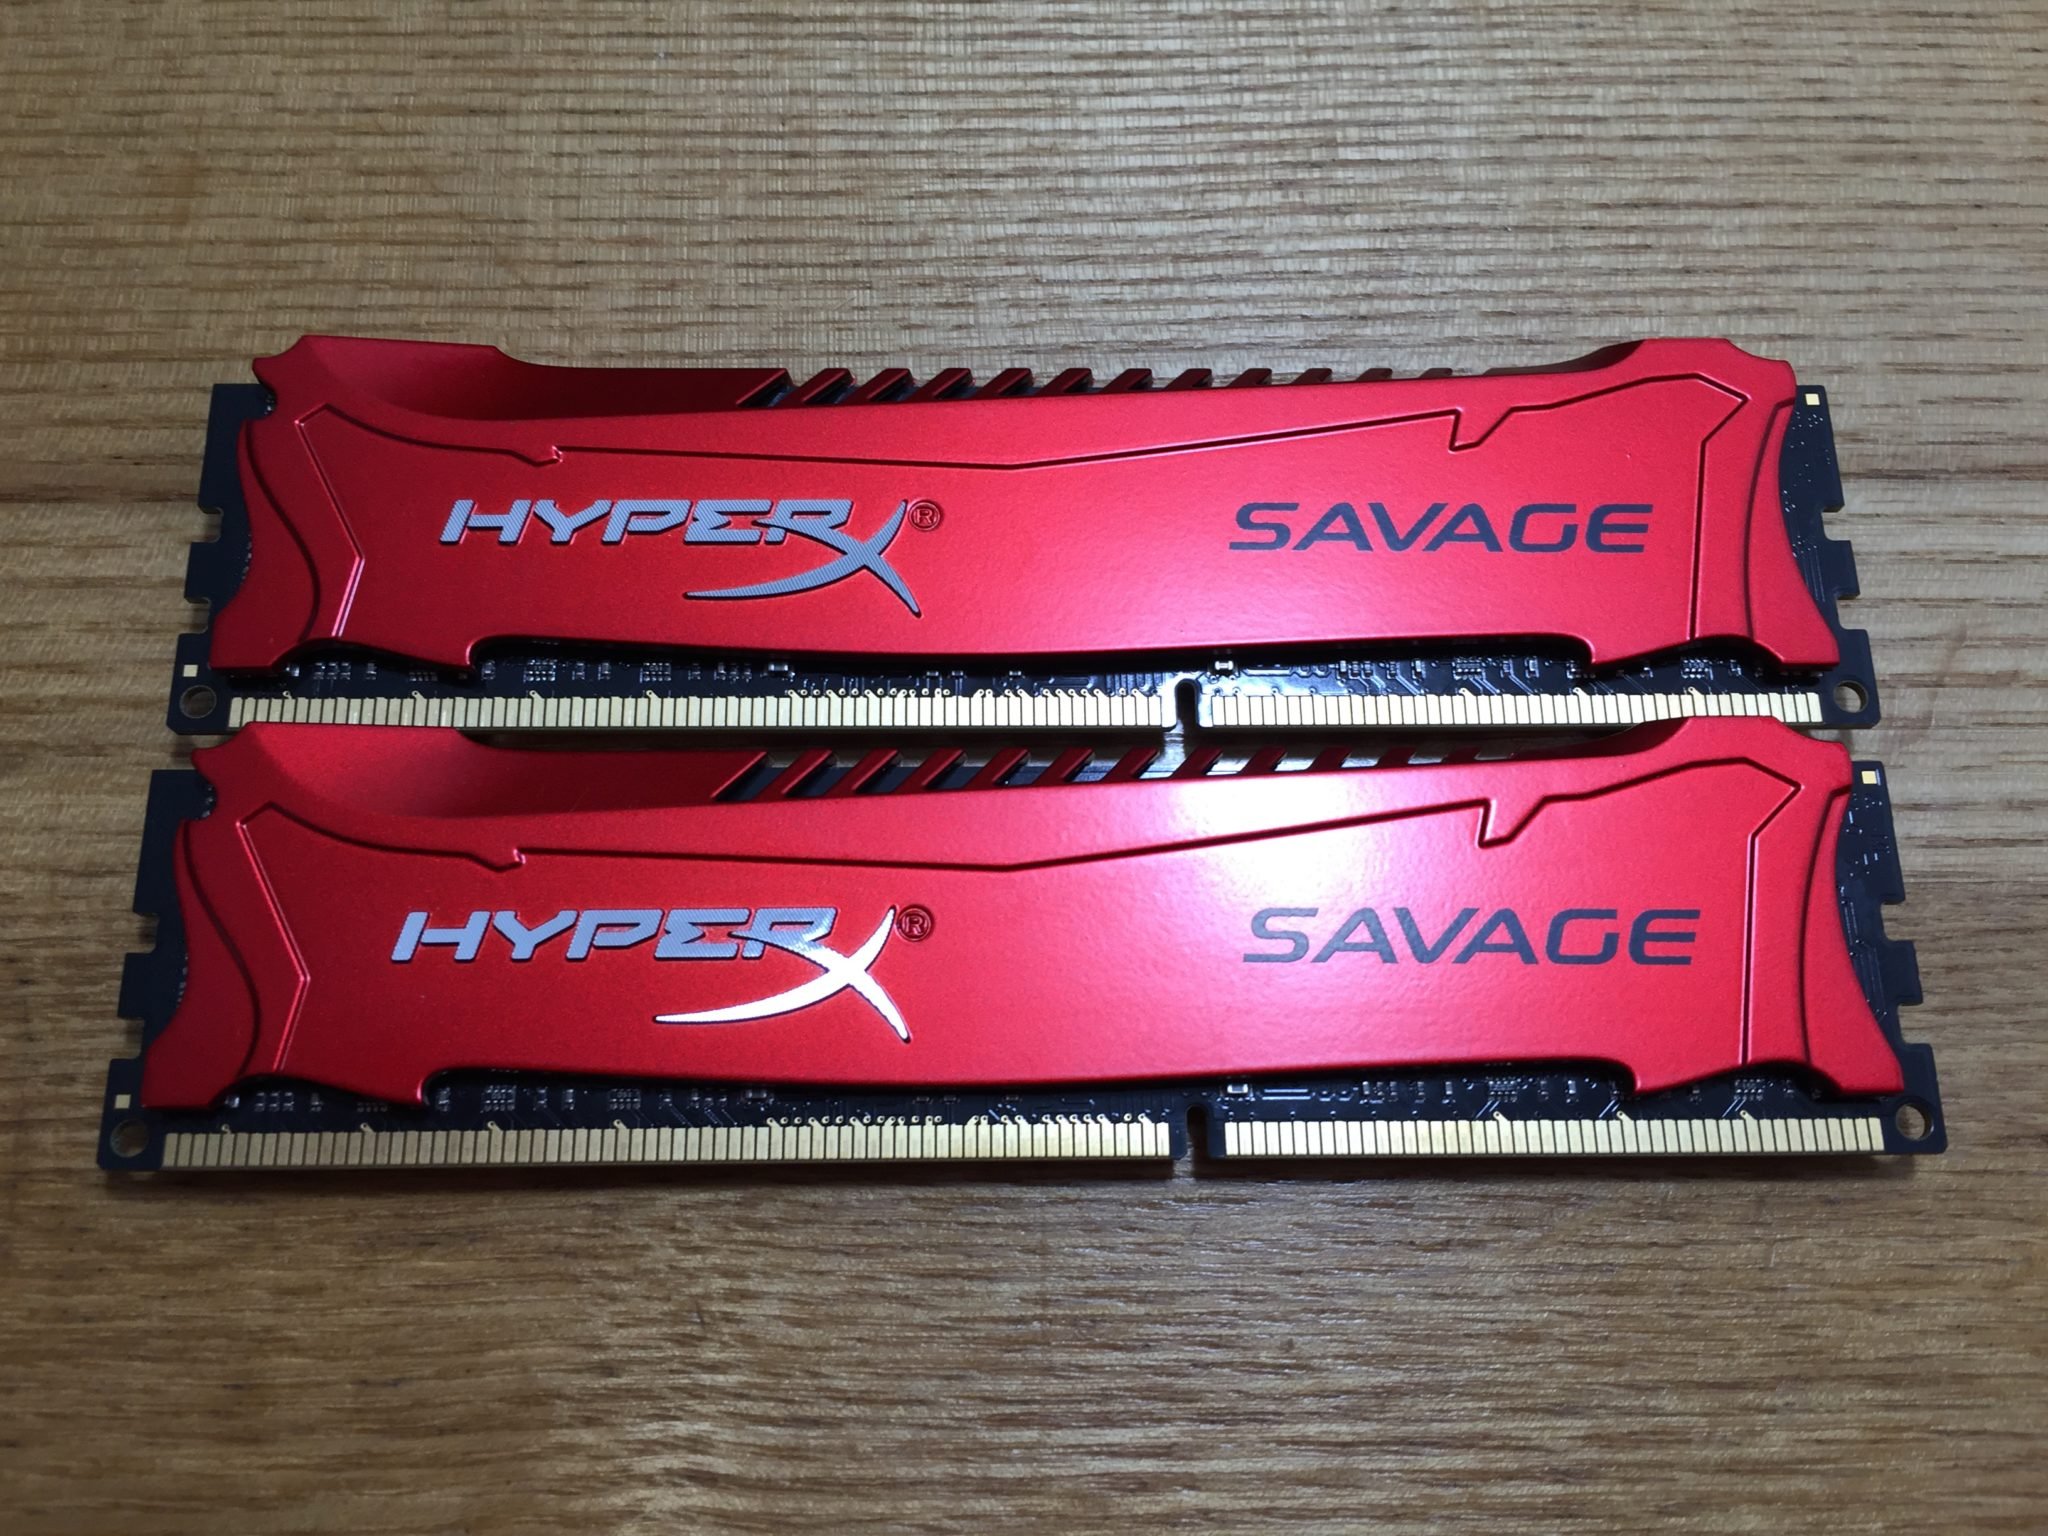 HyperX Savage 16GB 2400MHz Memory Review | Page 2 | Play3r